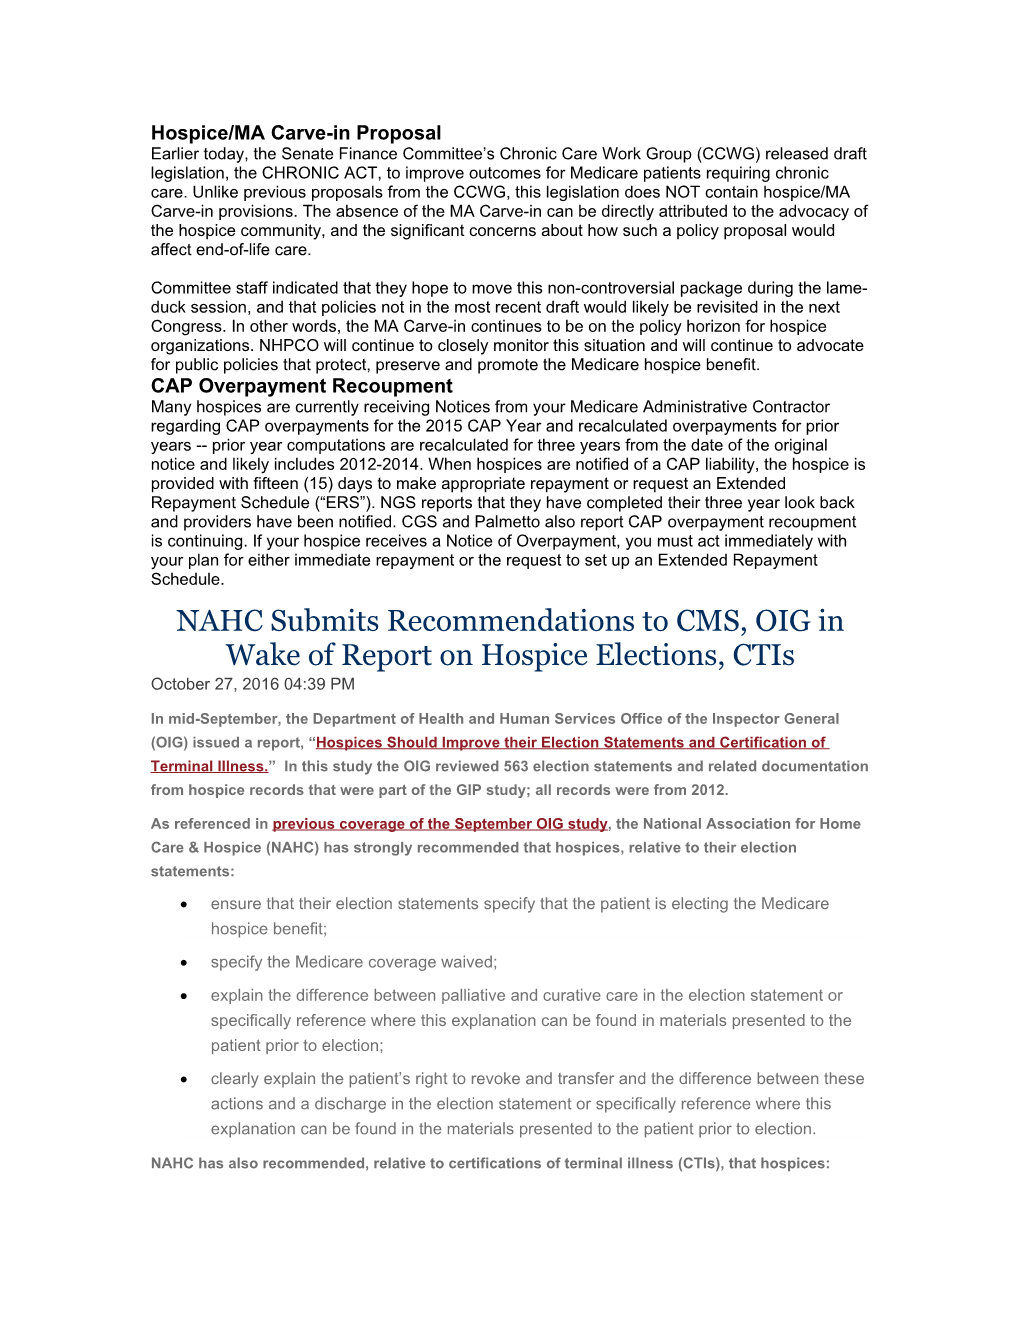 NAHC Submits Recommendations to CMS, OIG in Wake of Report on Hospice Elections, Ctis